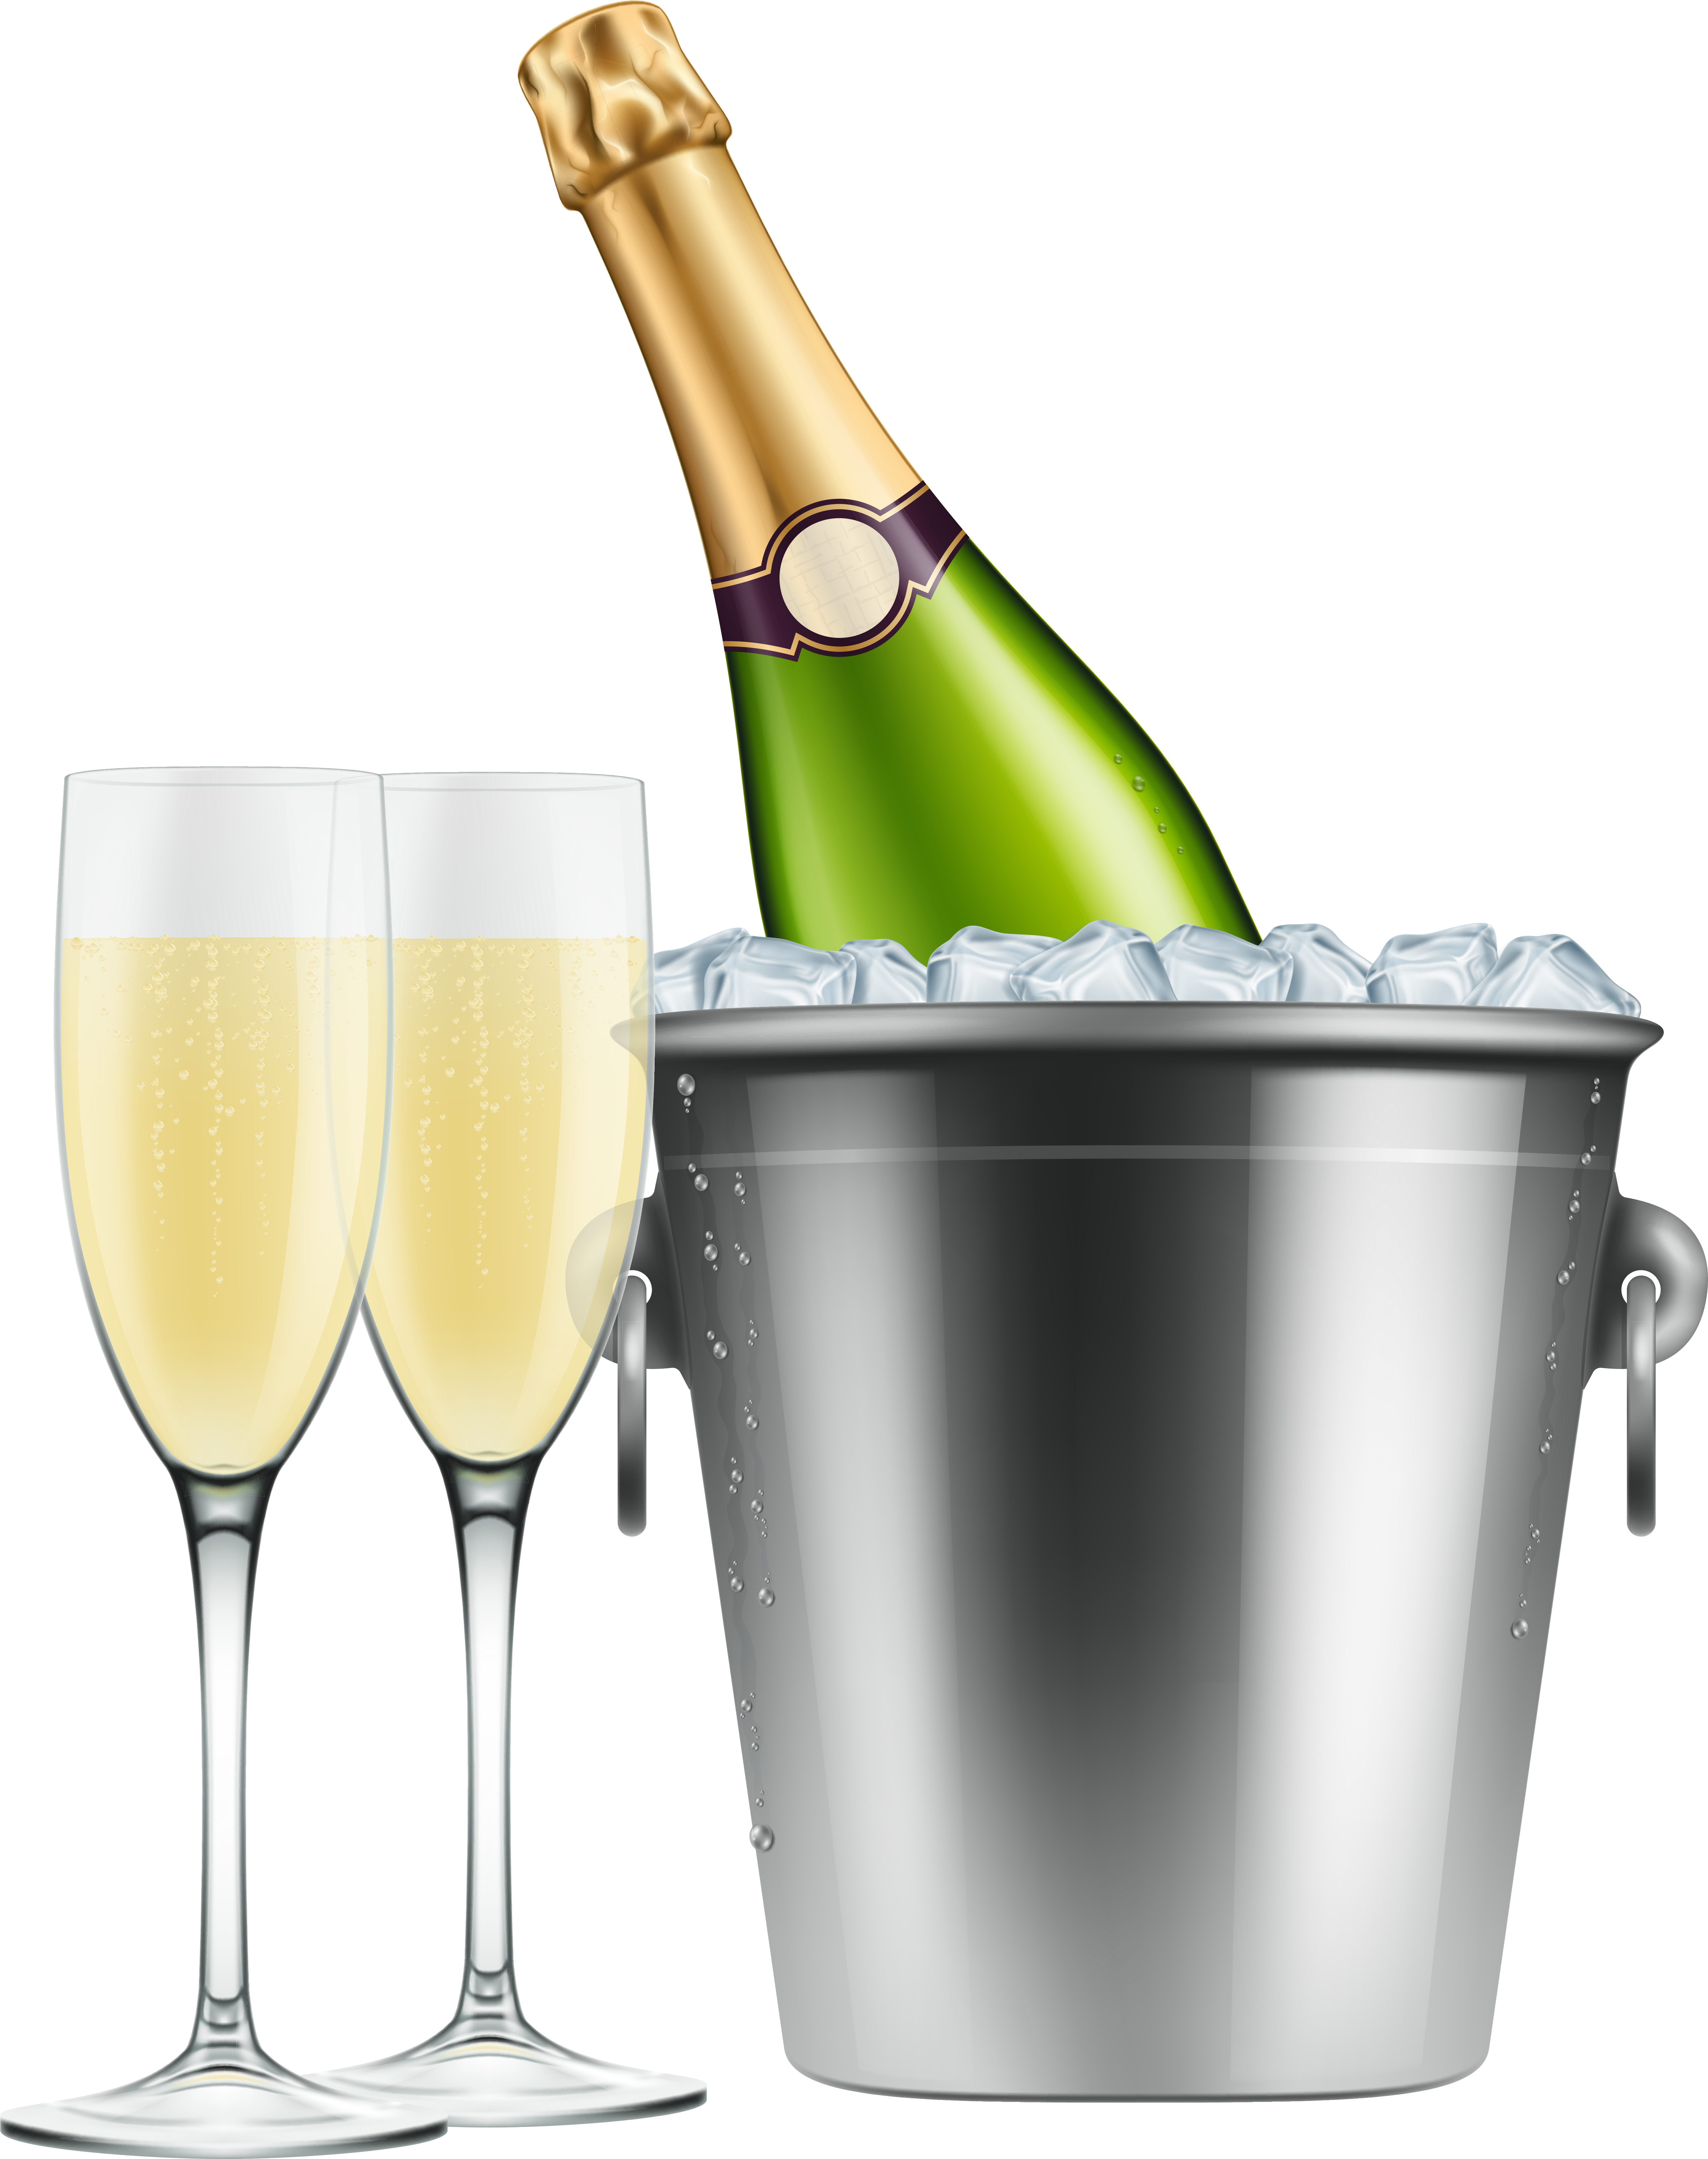 Champagne In Ice And Glasses Clip Art Image Gallery - Champagne And Glasses Png (5327x6722)